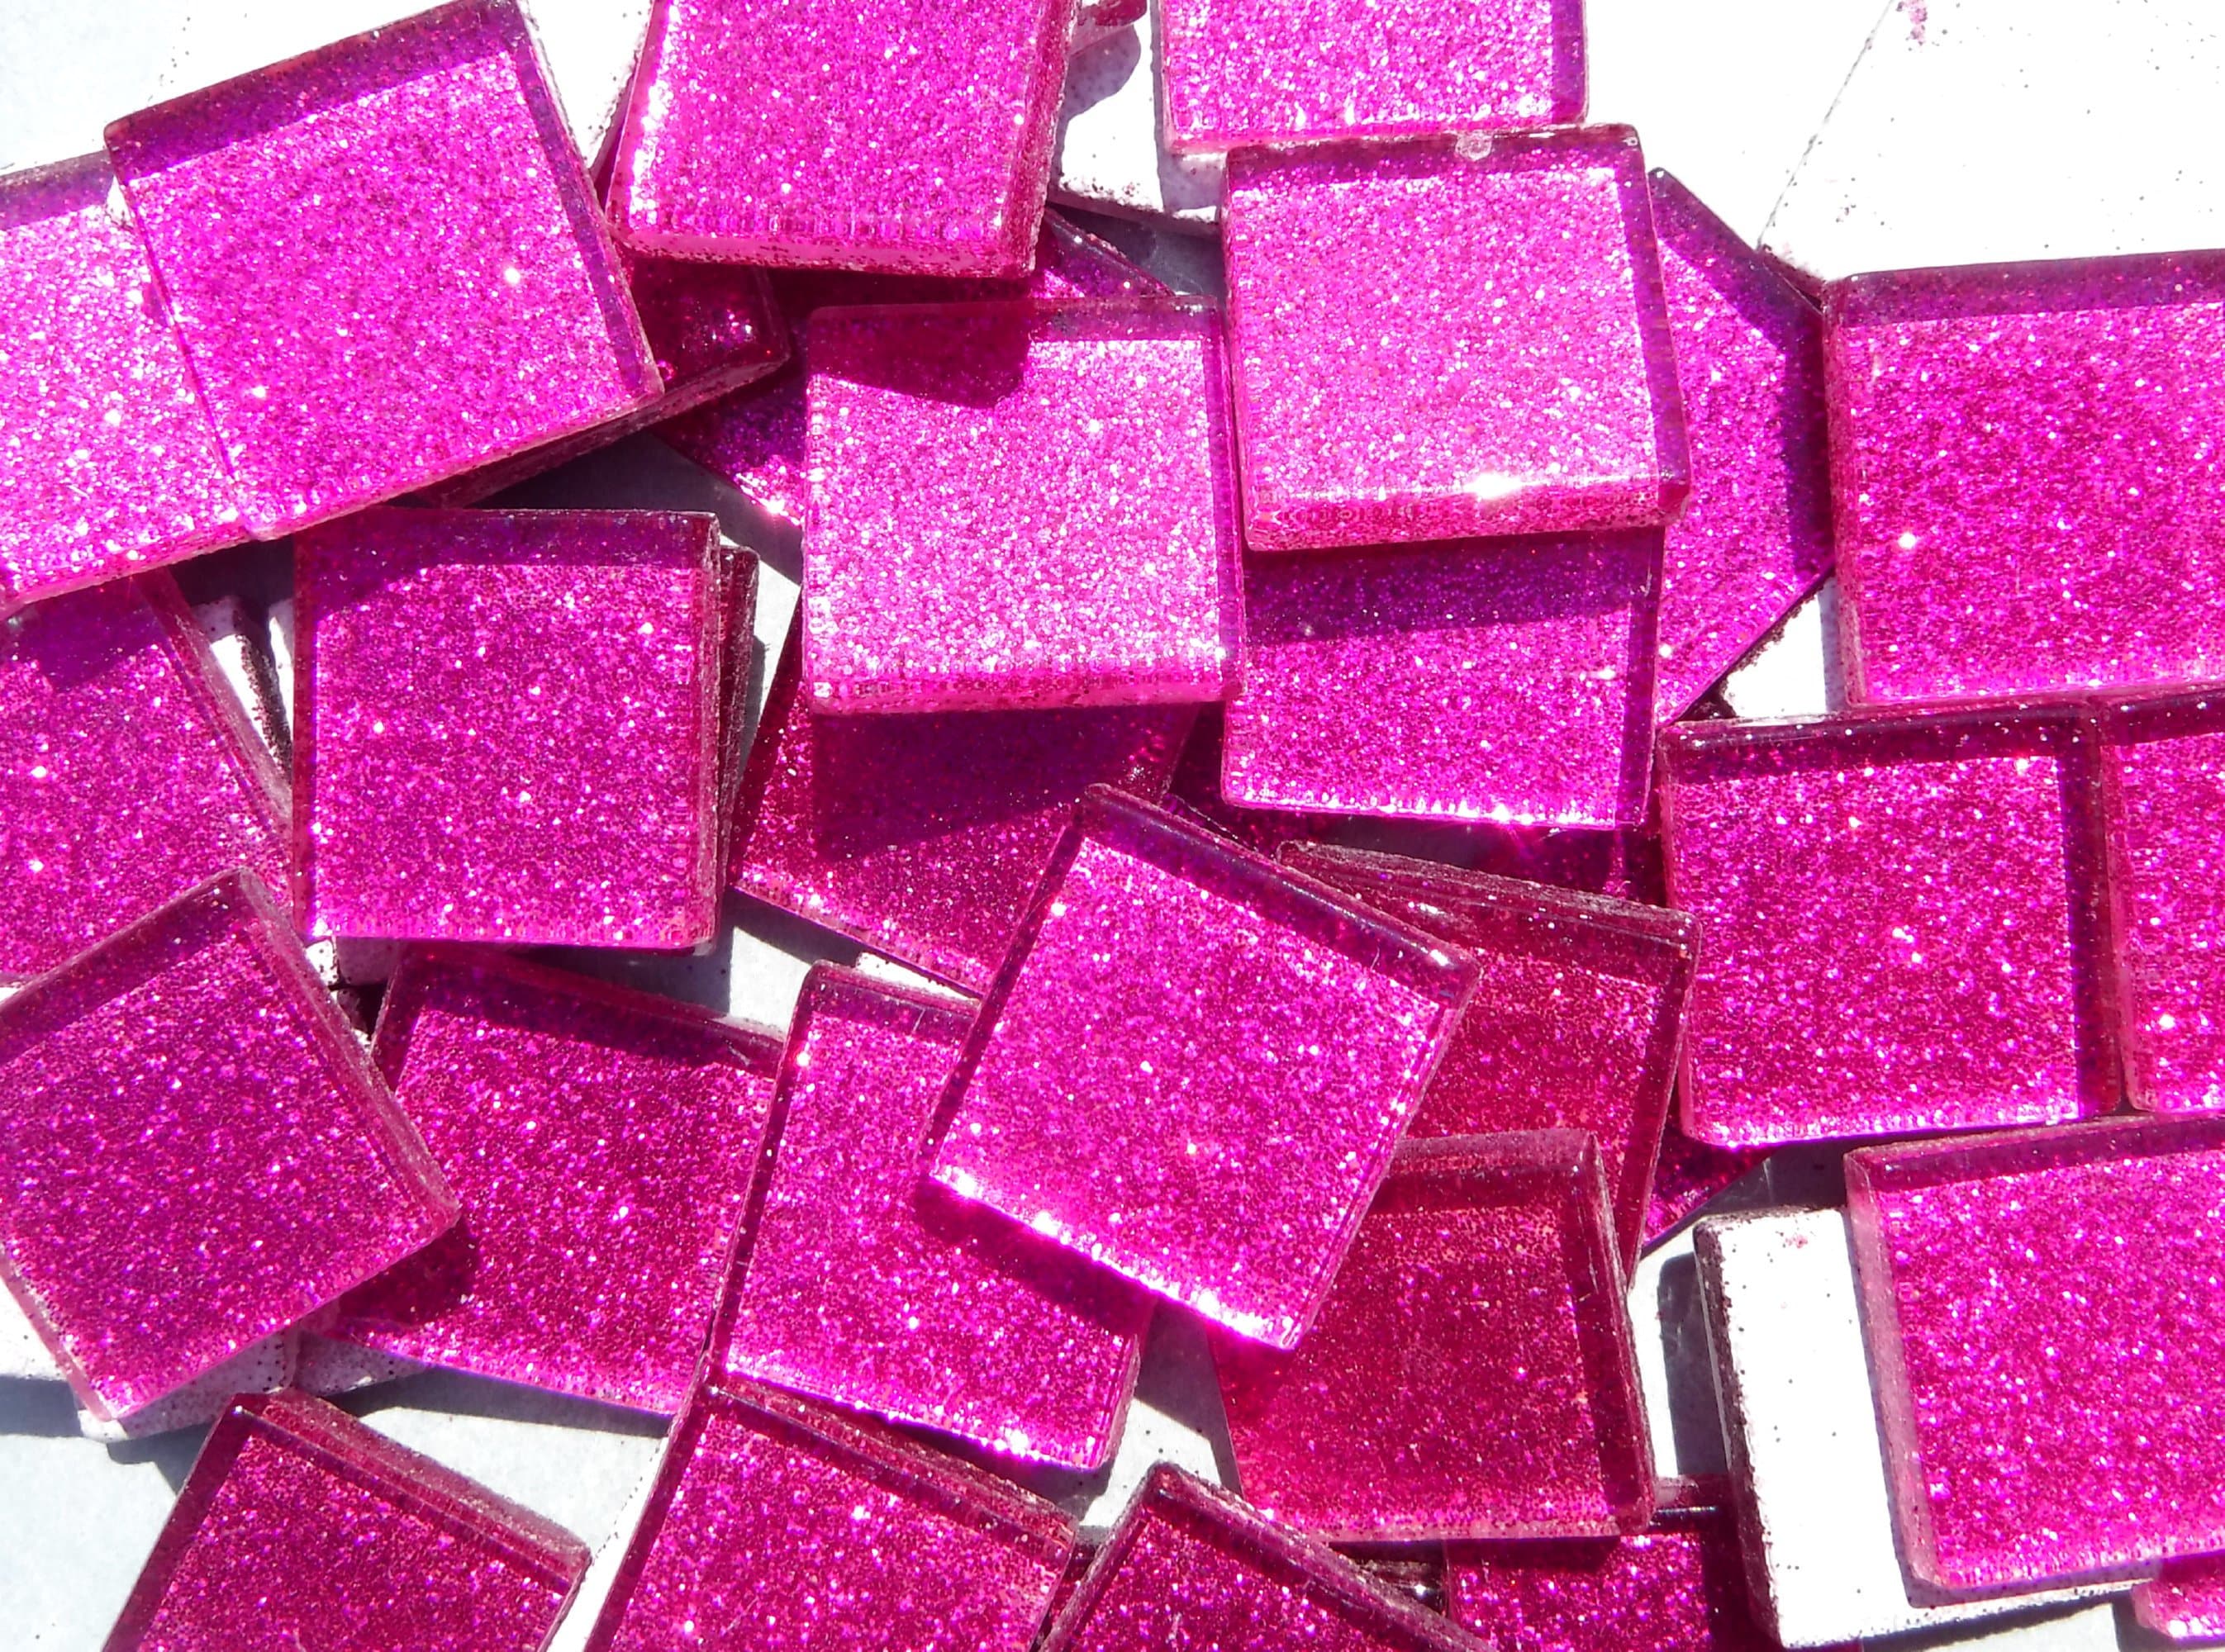 Assorted Acrylic Glitter Pony Beads Large Hole 9mm 4mm Hole Glitter Seed  Beads Rocaille Rainbow Macrame Beads 100 Pieces per Order 